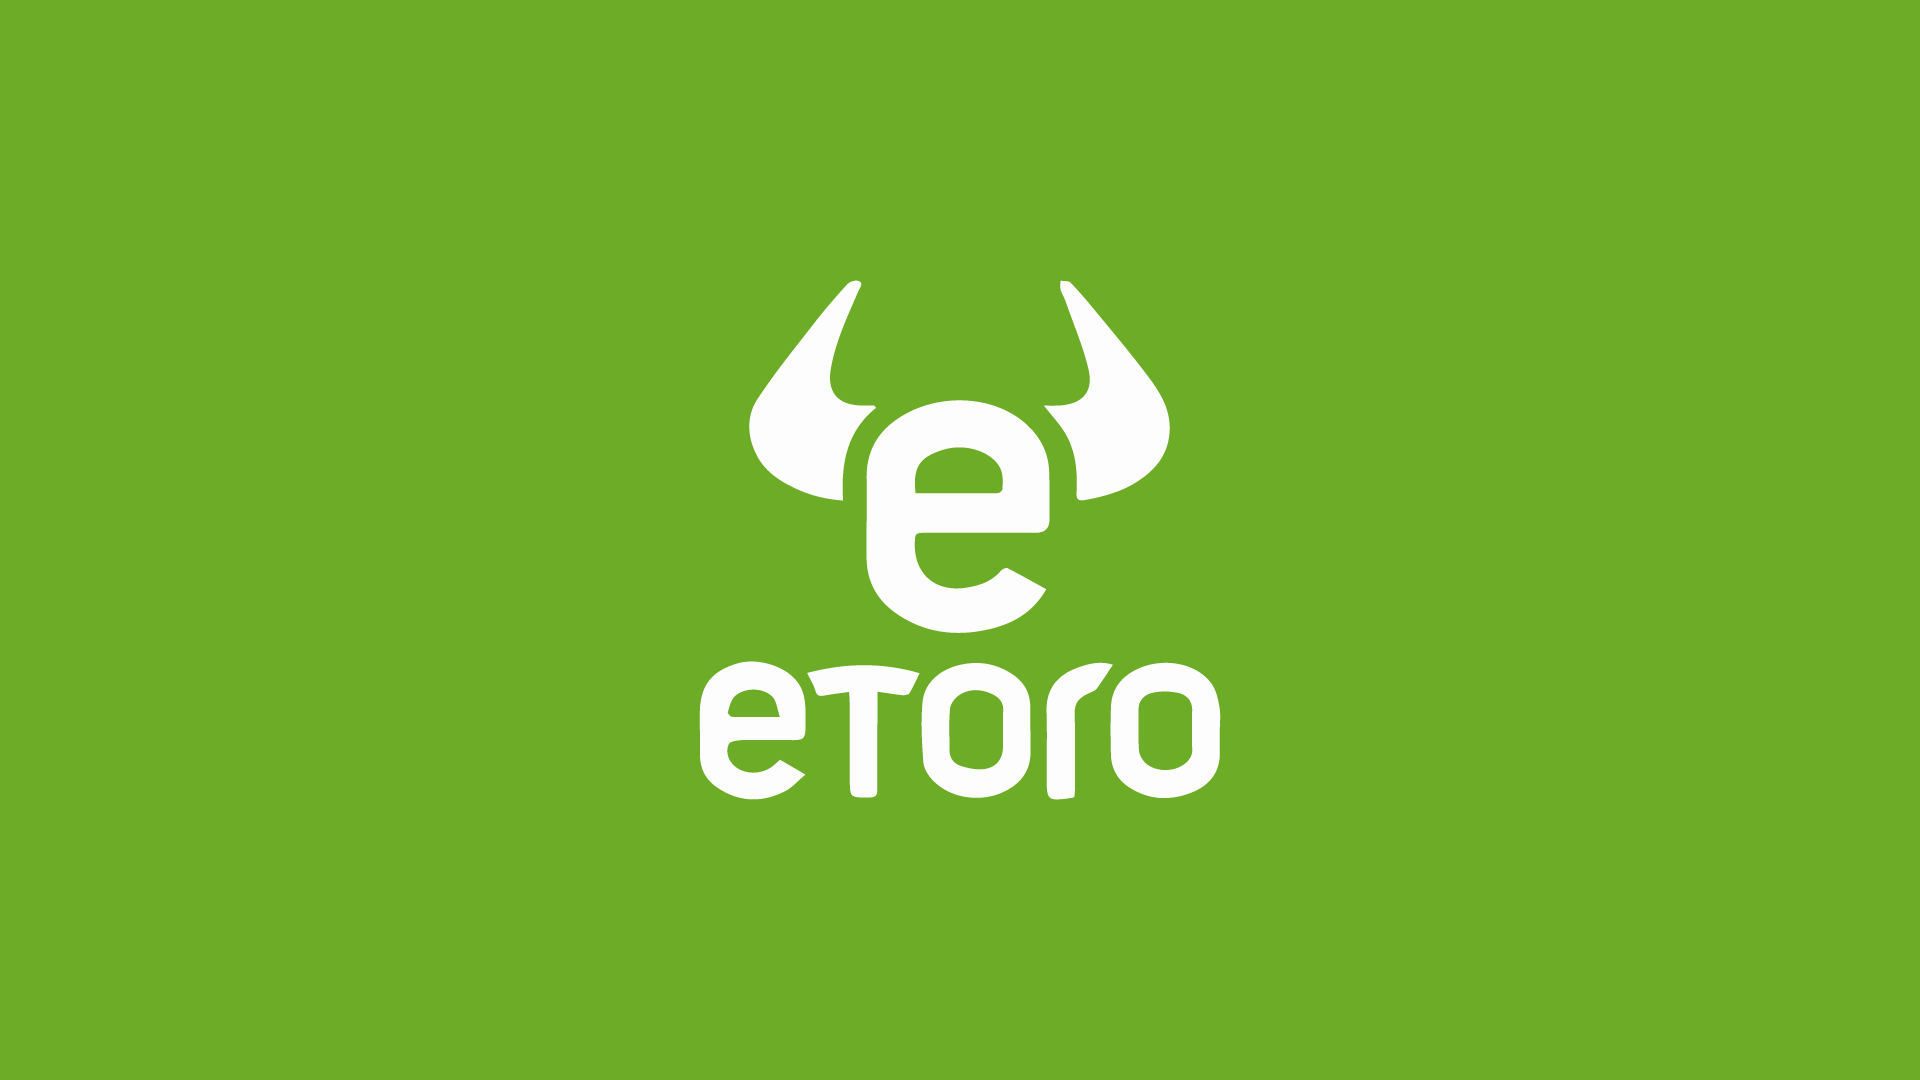 A new Bitcoin payment deal reached between eToro and 7 ...